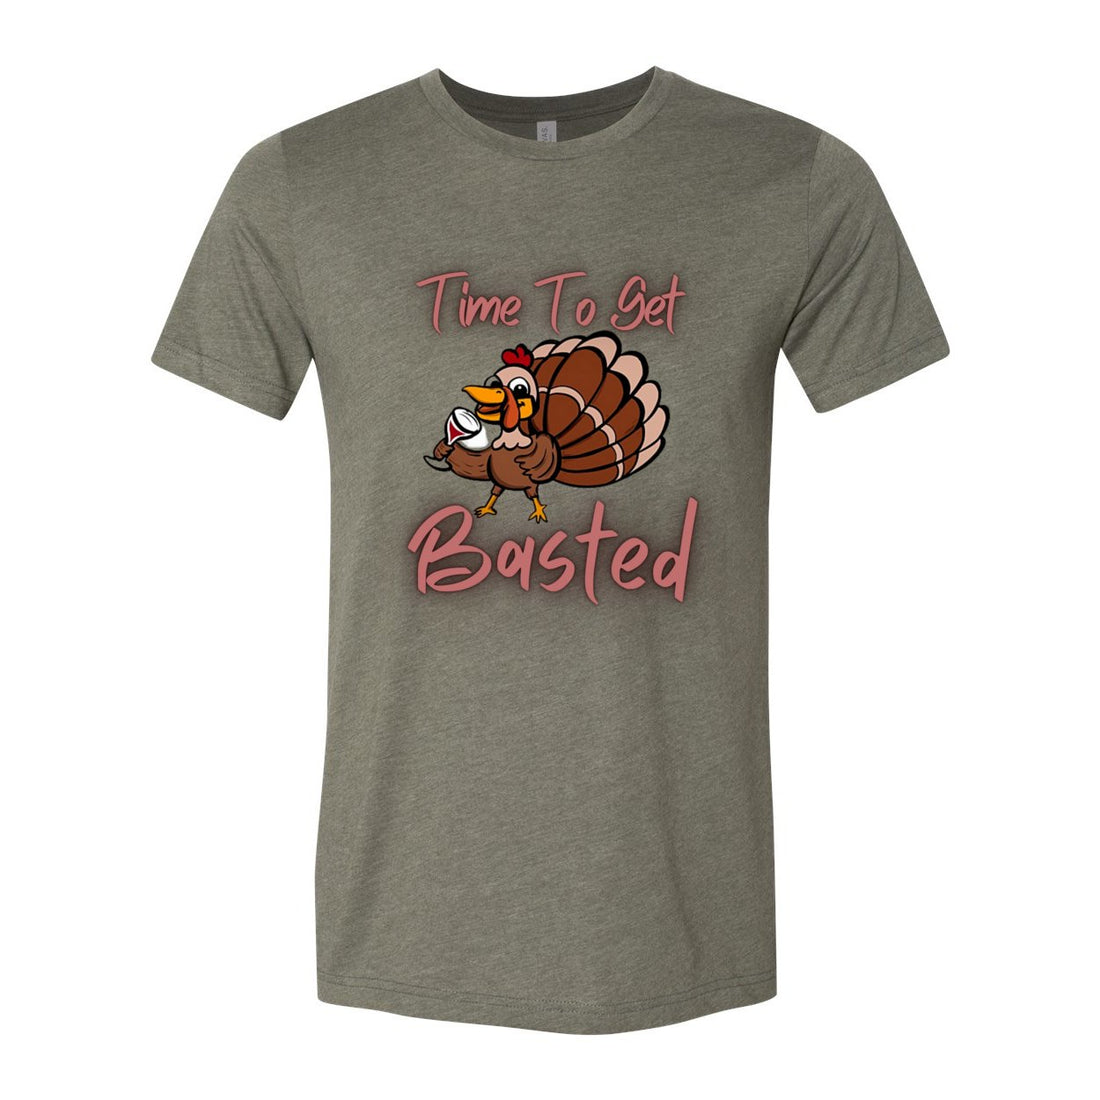 Time To Get Basted Short Sleeve Jersey Tee - T-Shirts - Positively Sassy - Time To Get Basted Short Sleeve Jersey Tee